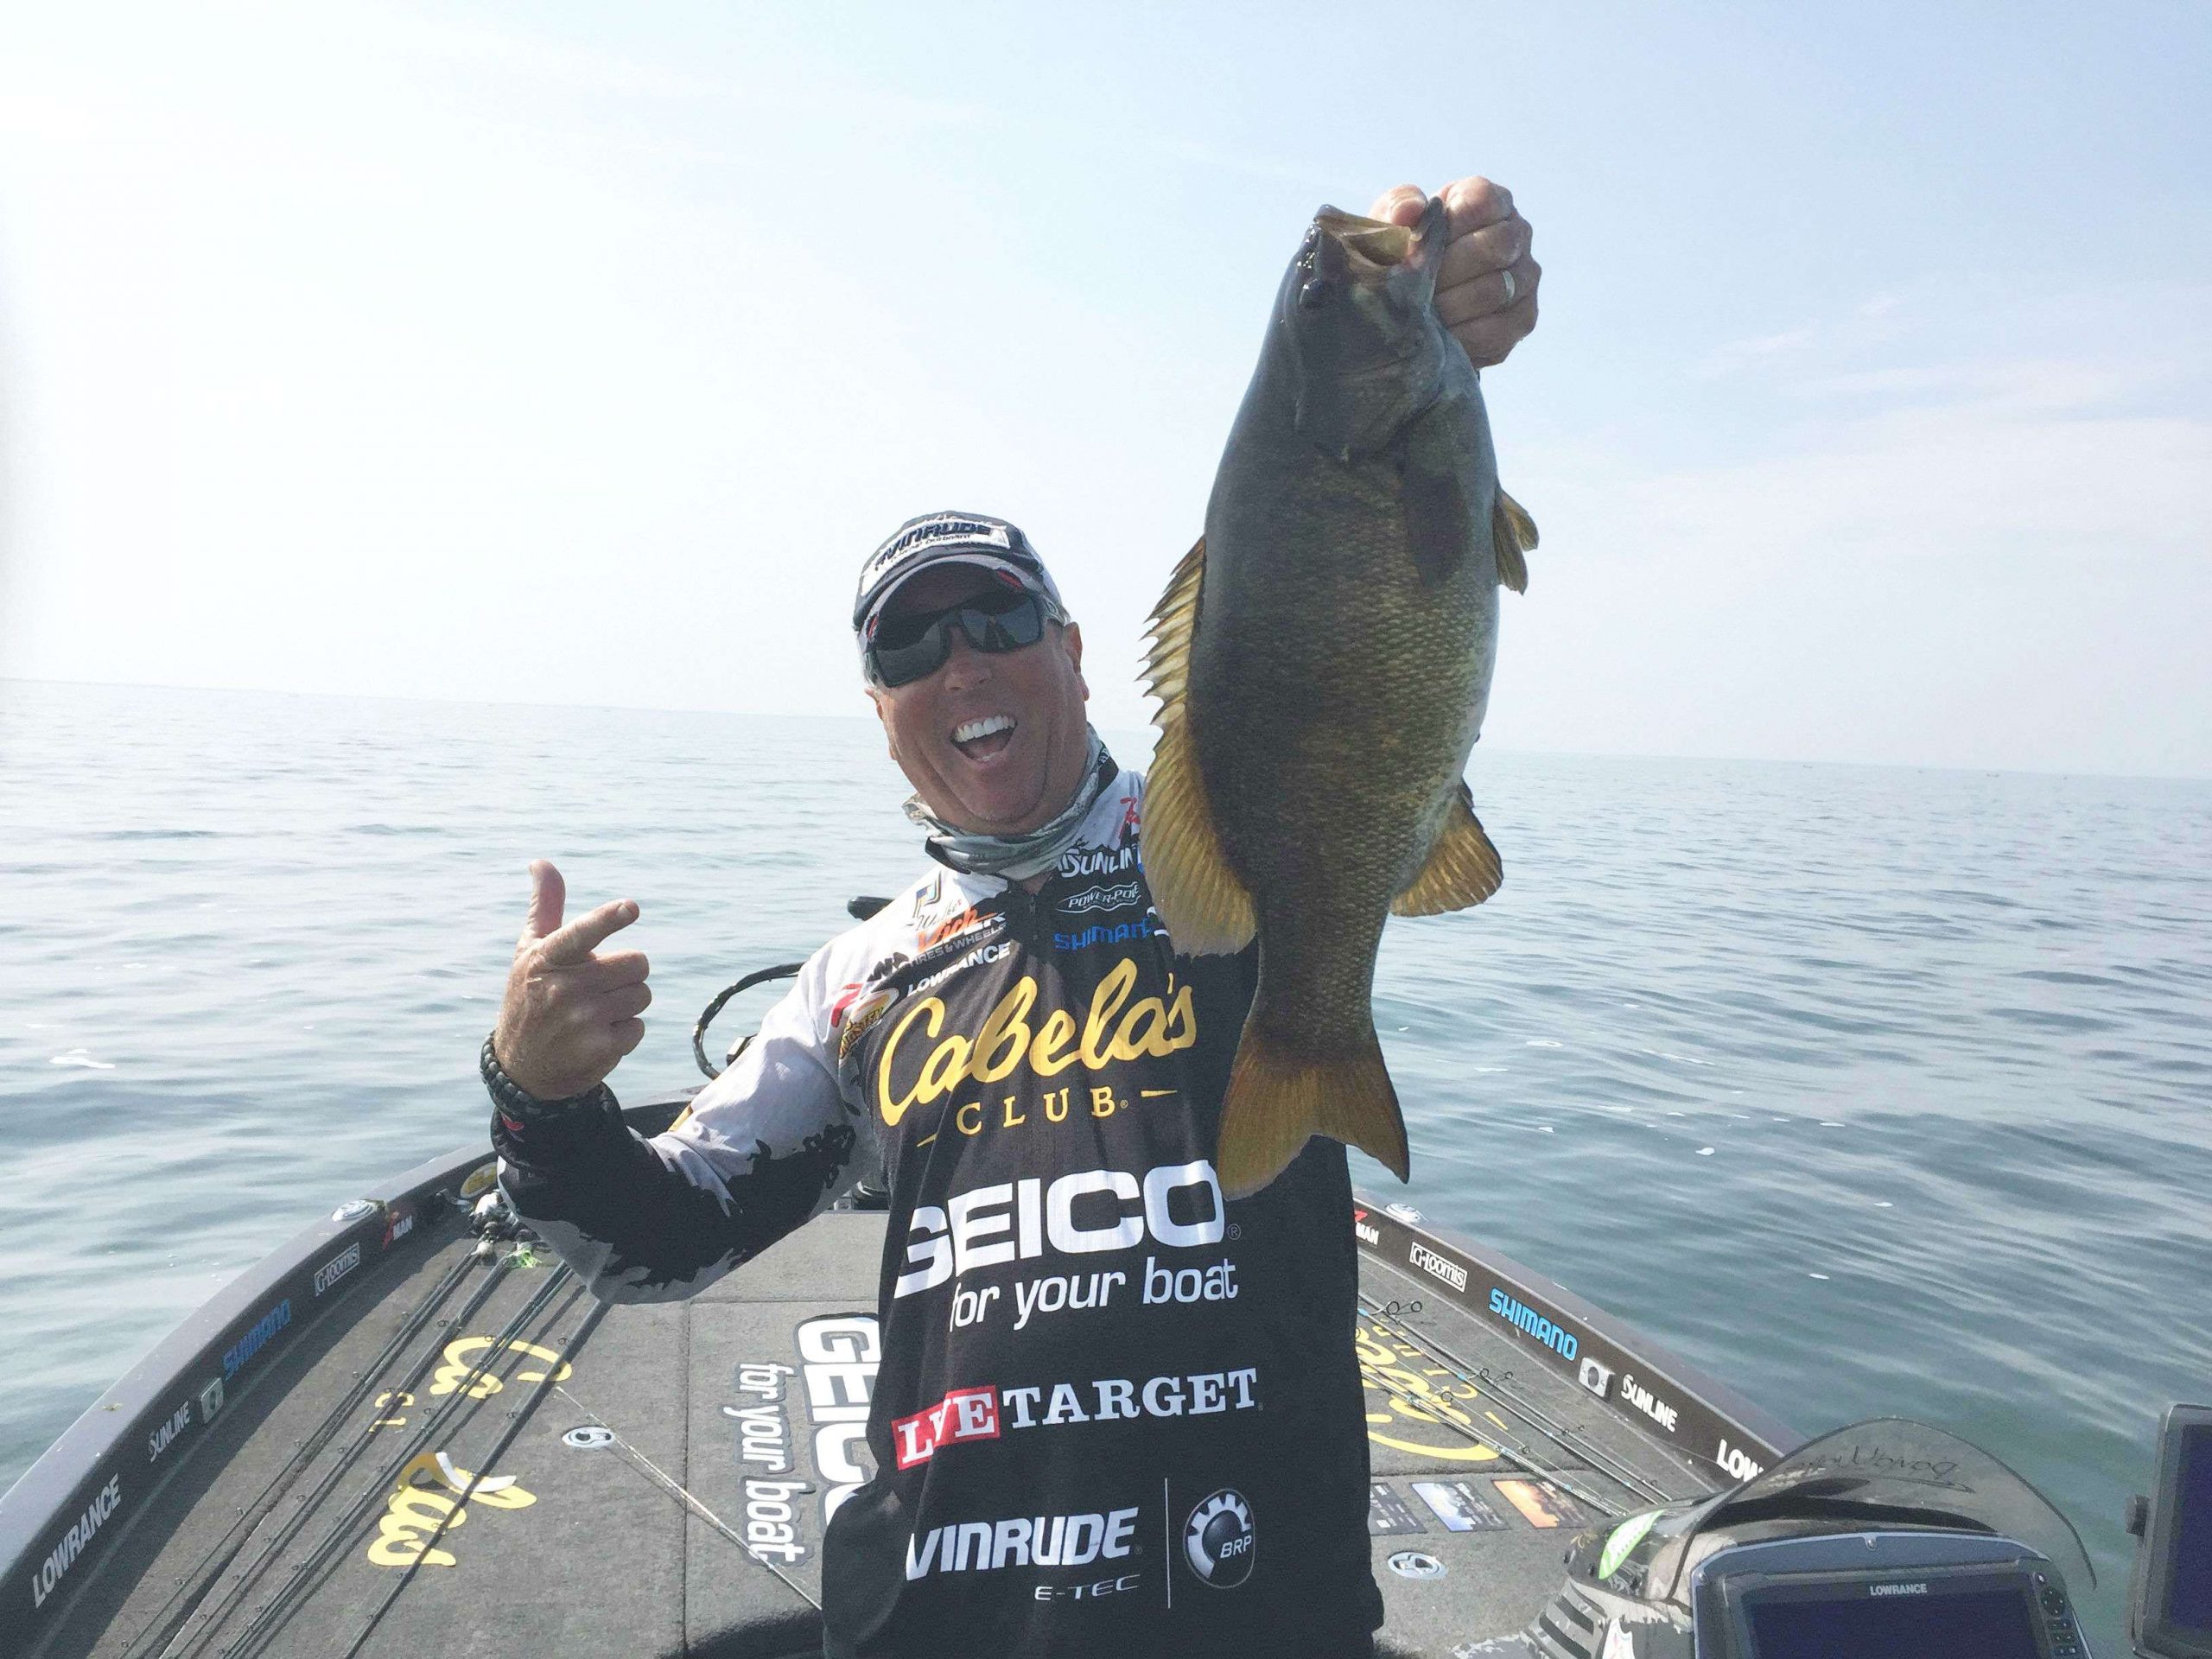 48th place: David Walker (32-11) is locked into the Classic and at this point canât drop too much. A move up the standings, though, would provide some changes in points for several anglers.